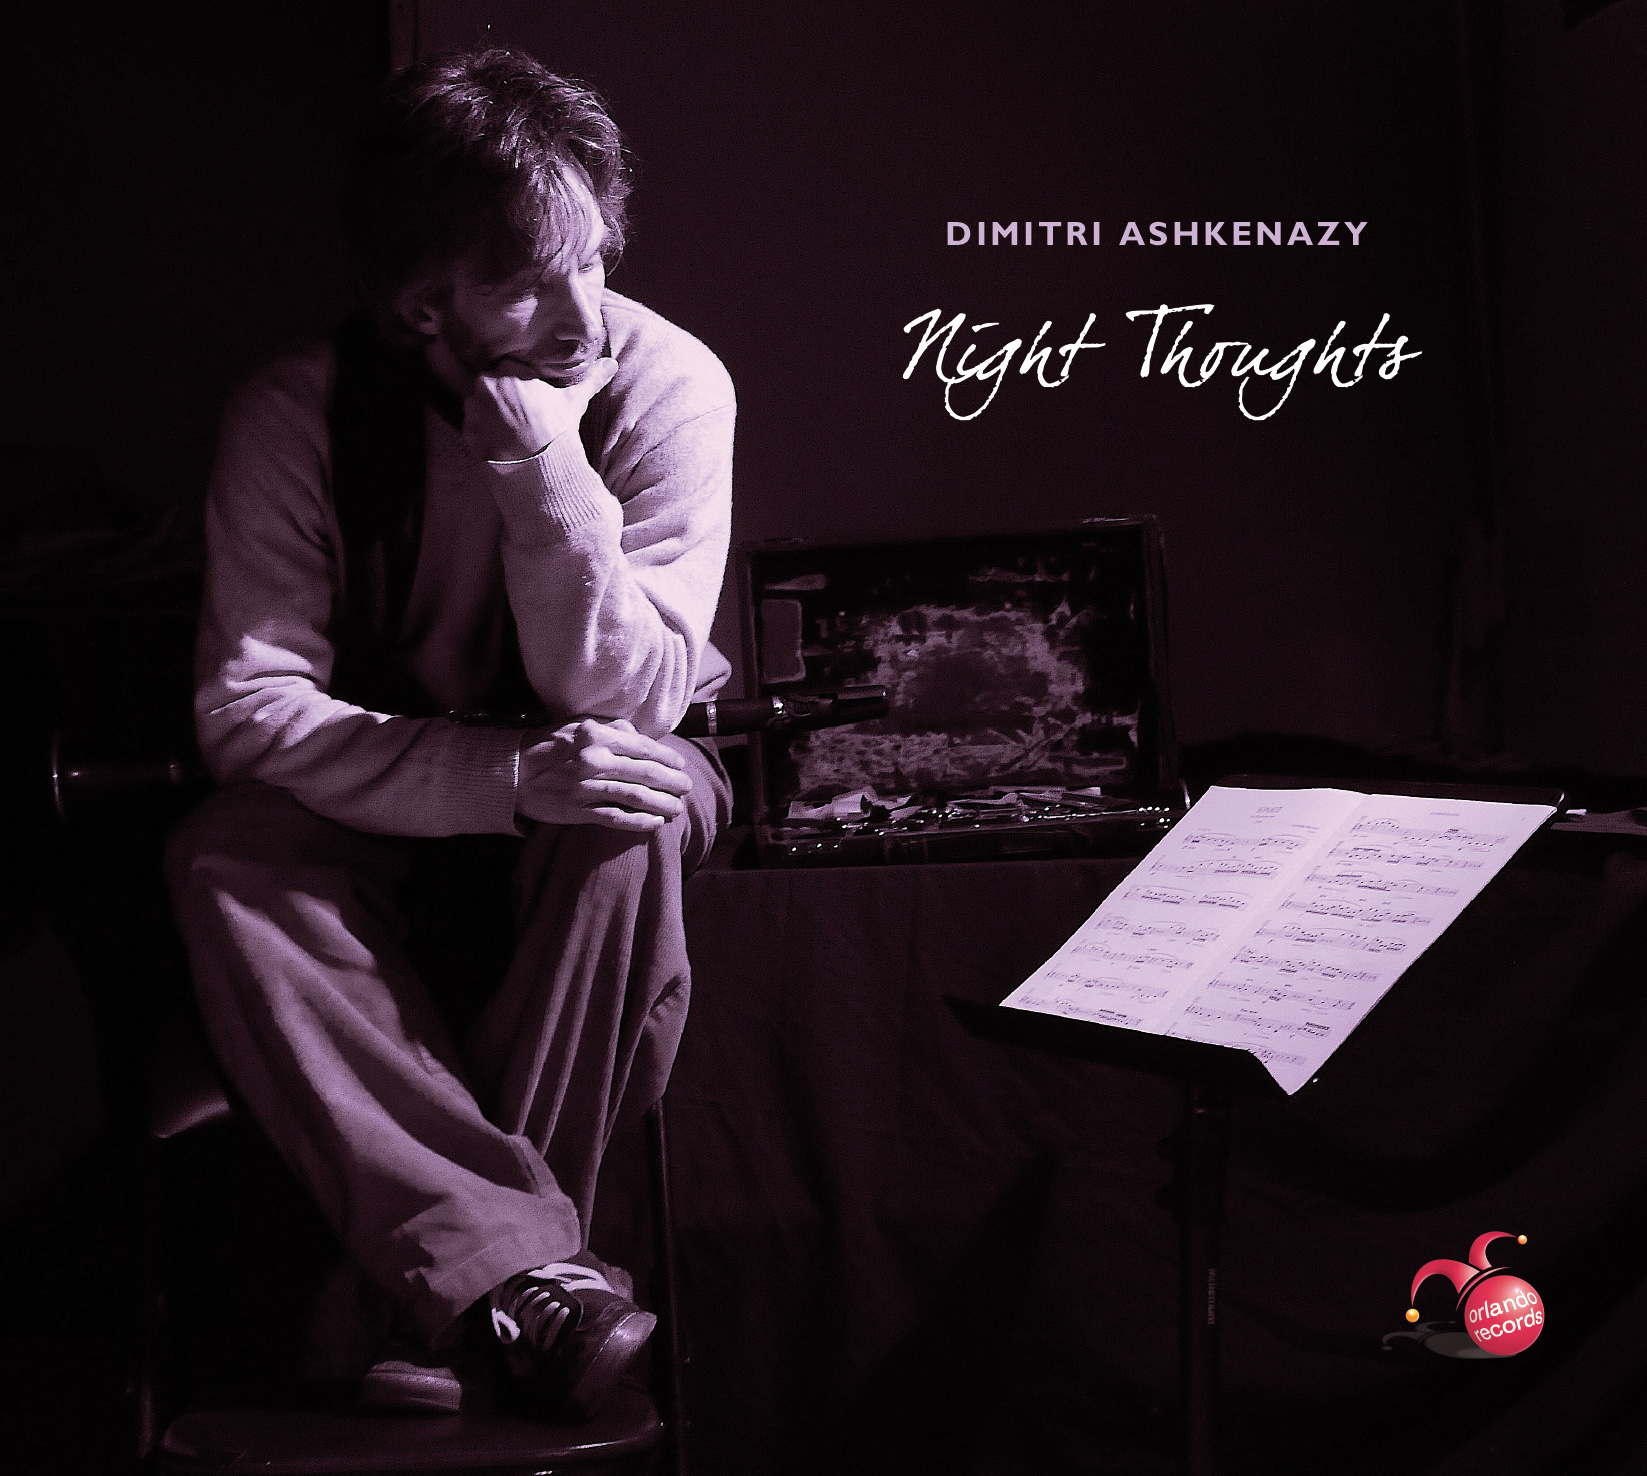 Nicht Thoughts, CD cover front